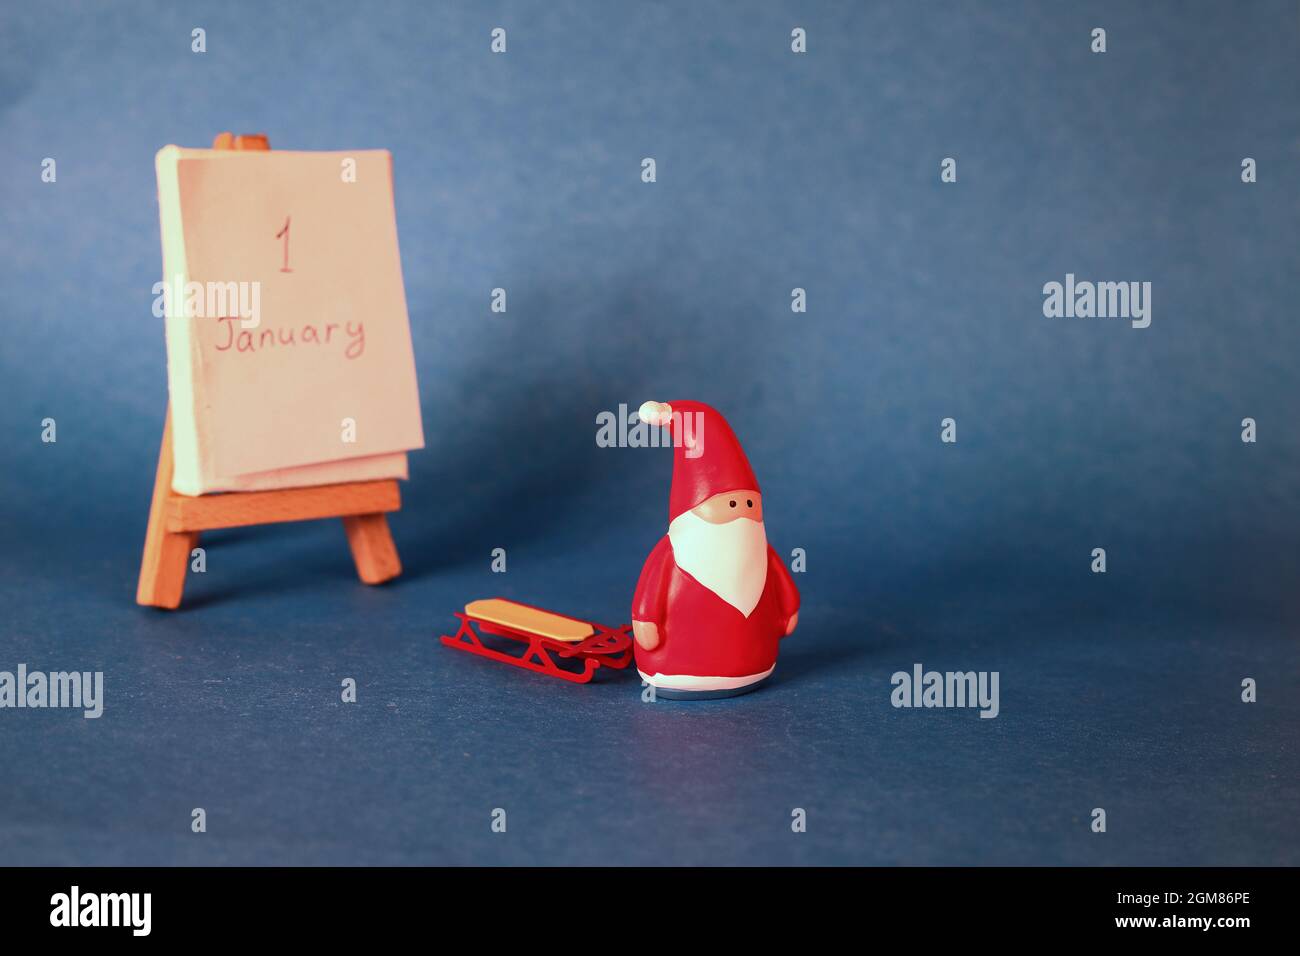 santa claus with empty sleigh walking on the 1-st of January. New year concept on blue background Stock Photo